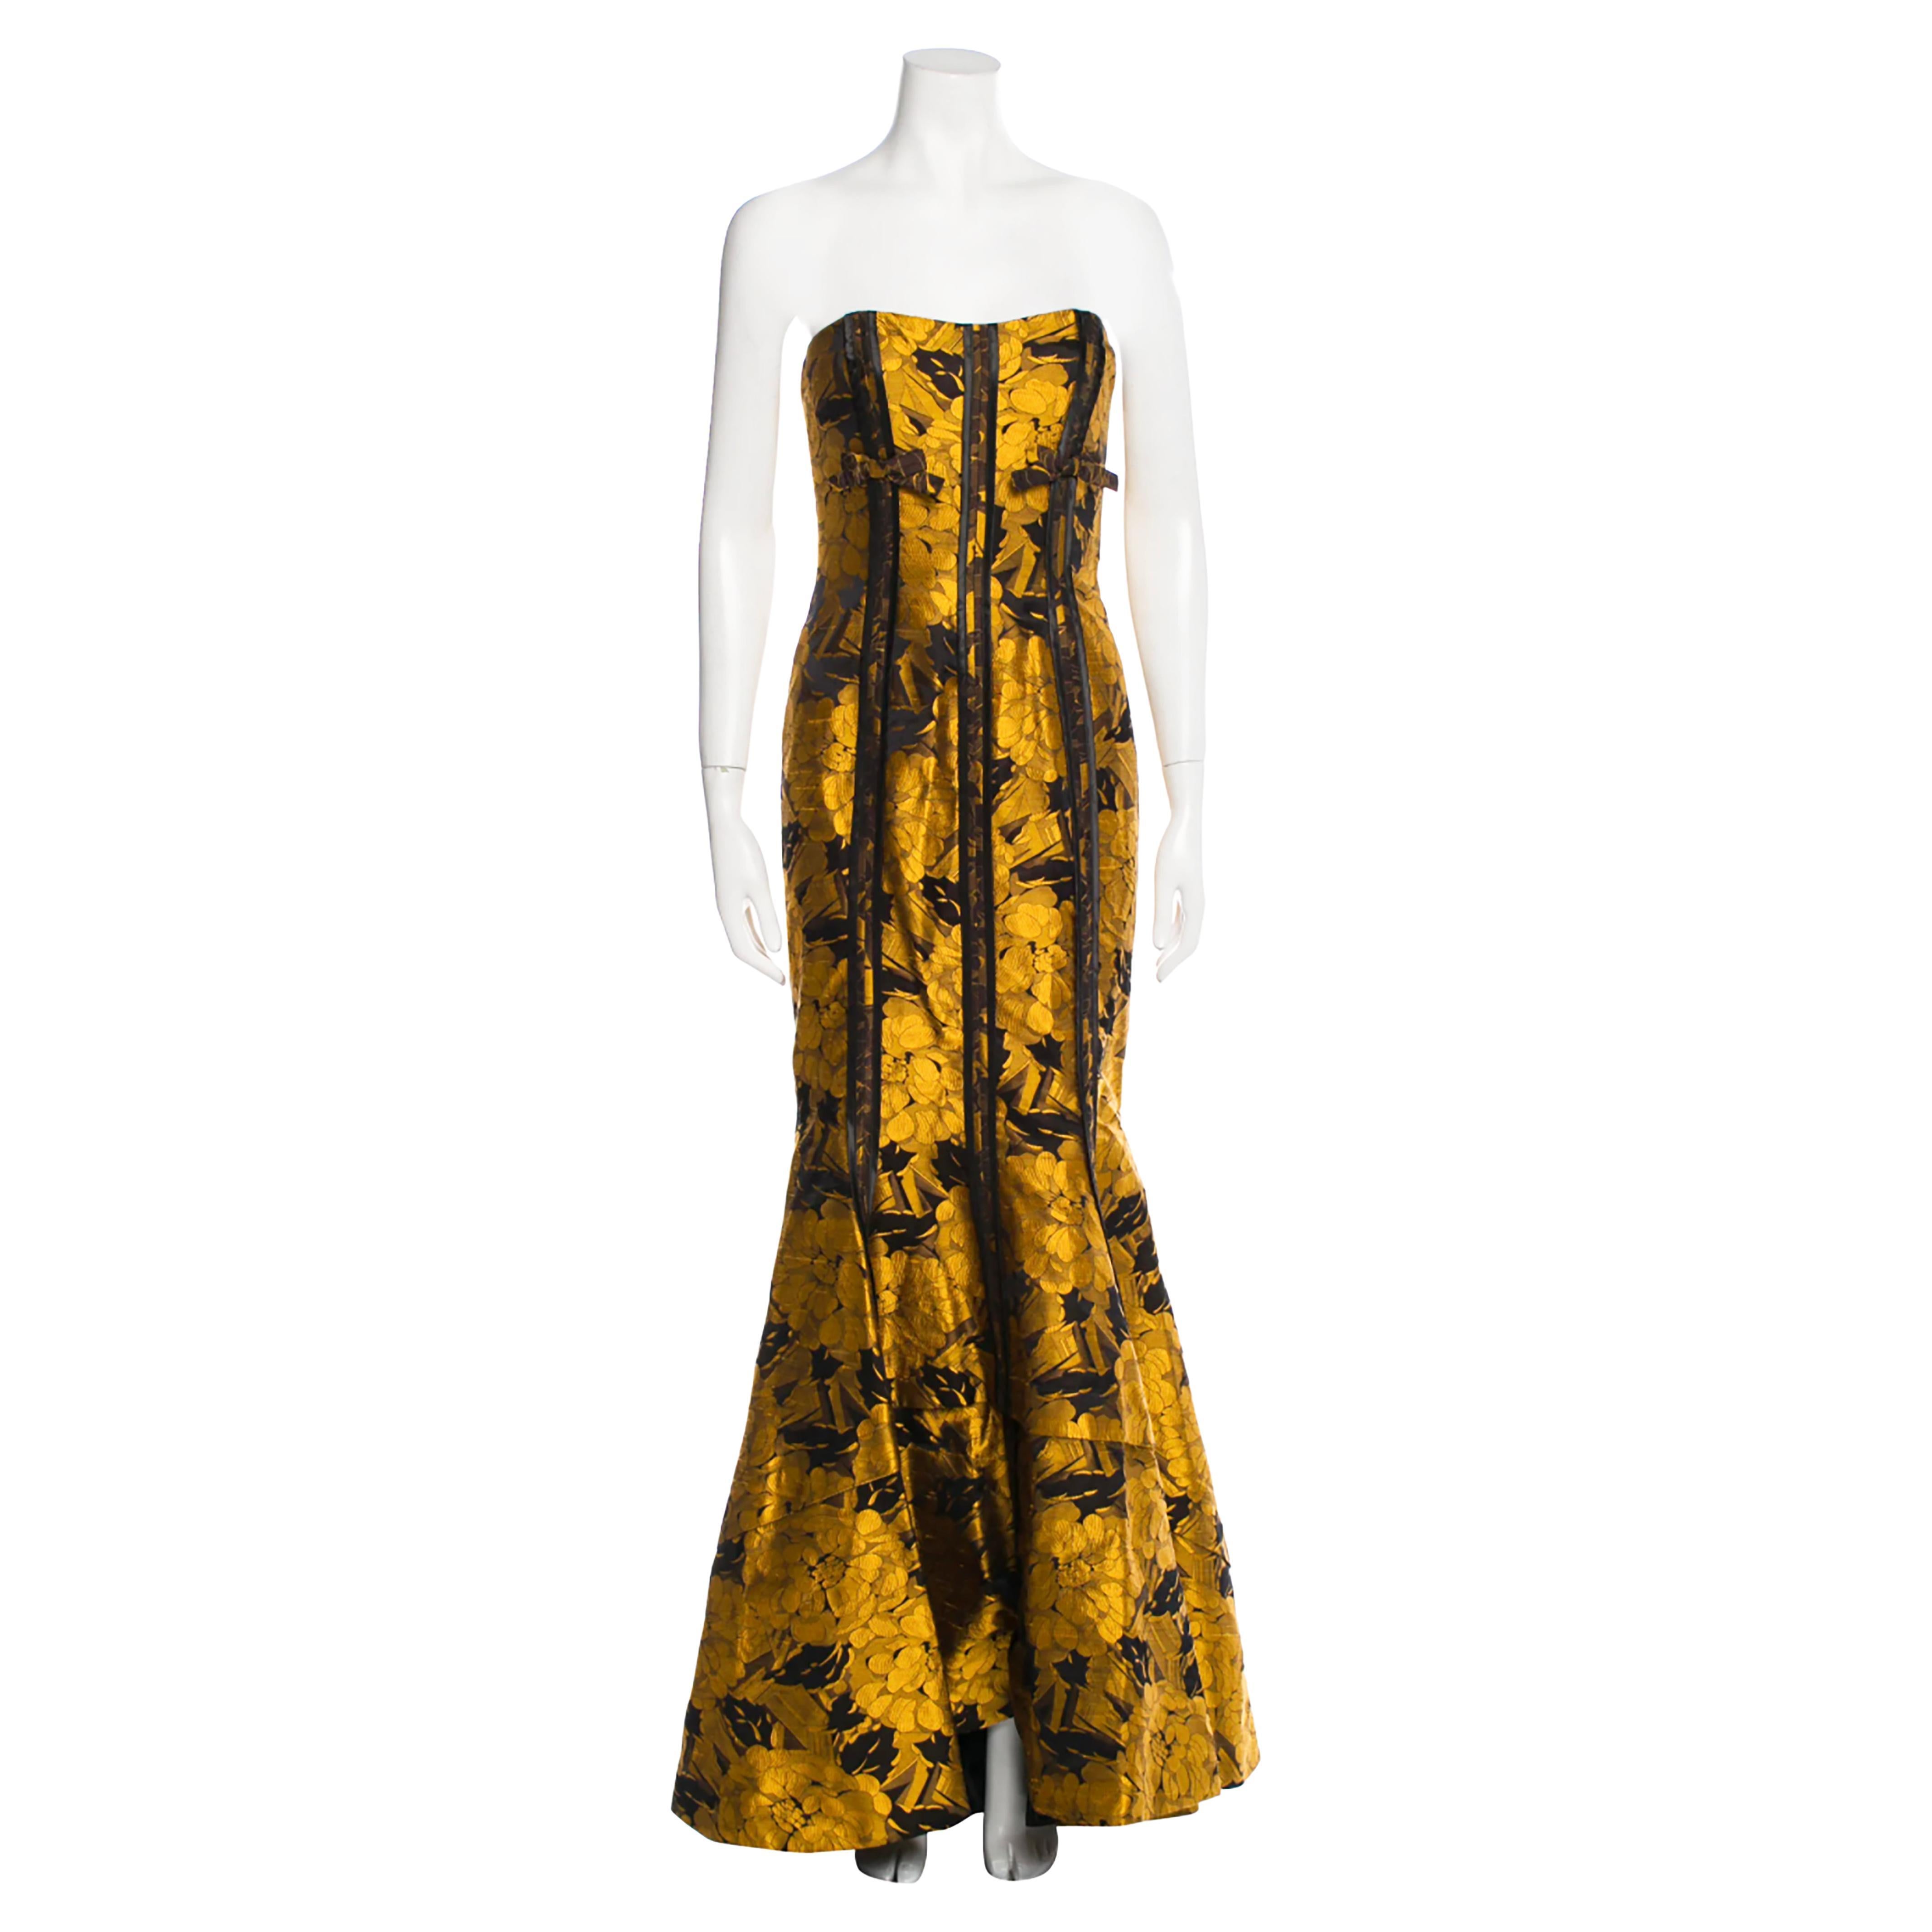 Christian Lacroix Floral Brocade Corseted Evening Gown